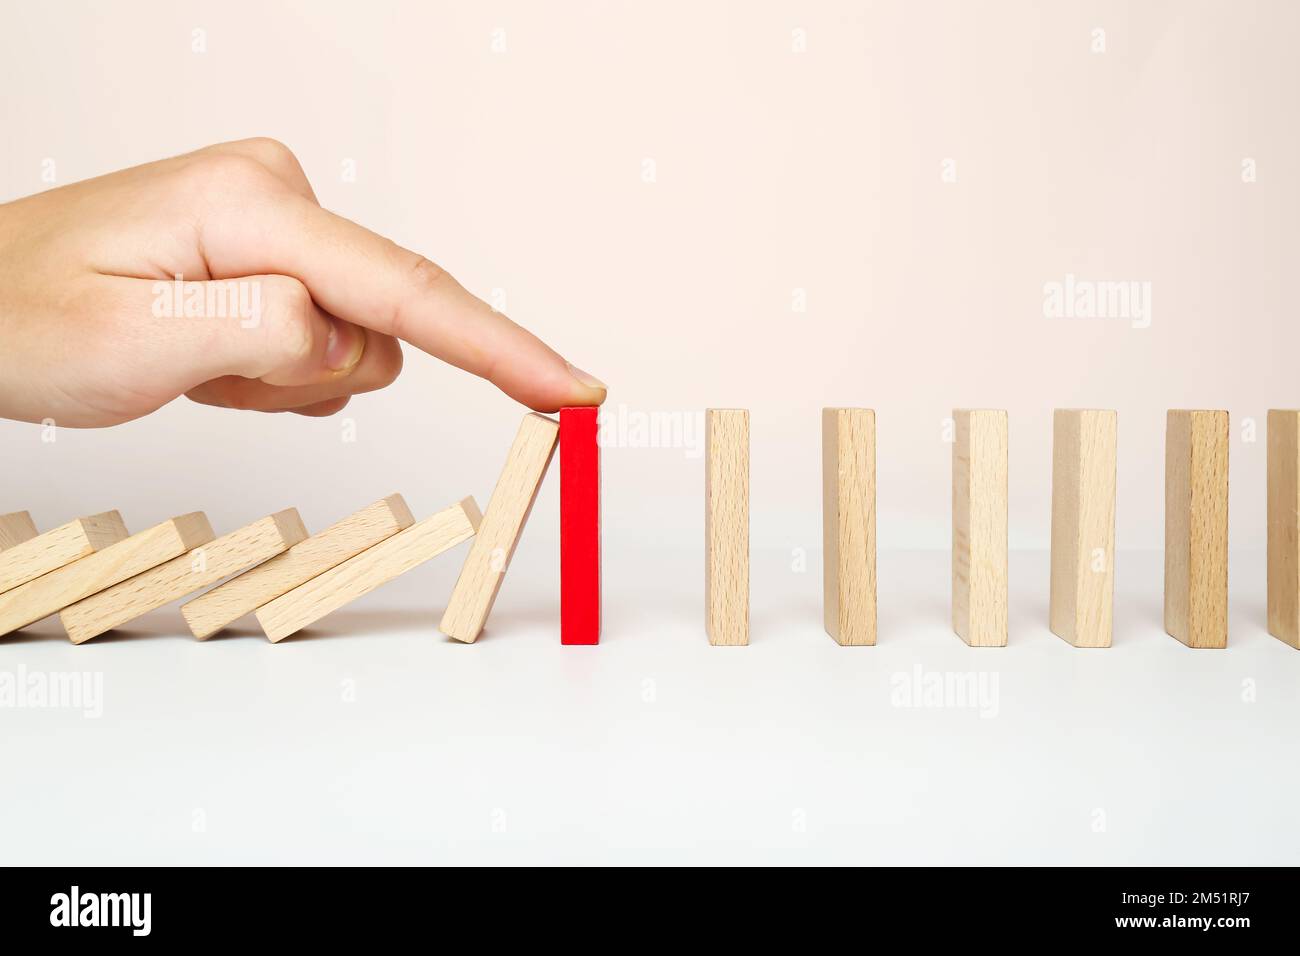 The domino falls, and the finger stops the chain reaction. The concept of solving the problem. Stock Photo